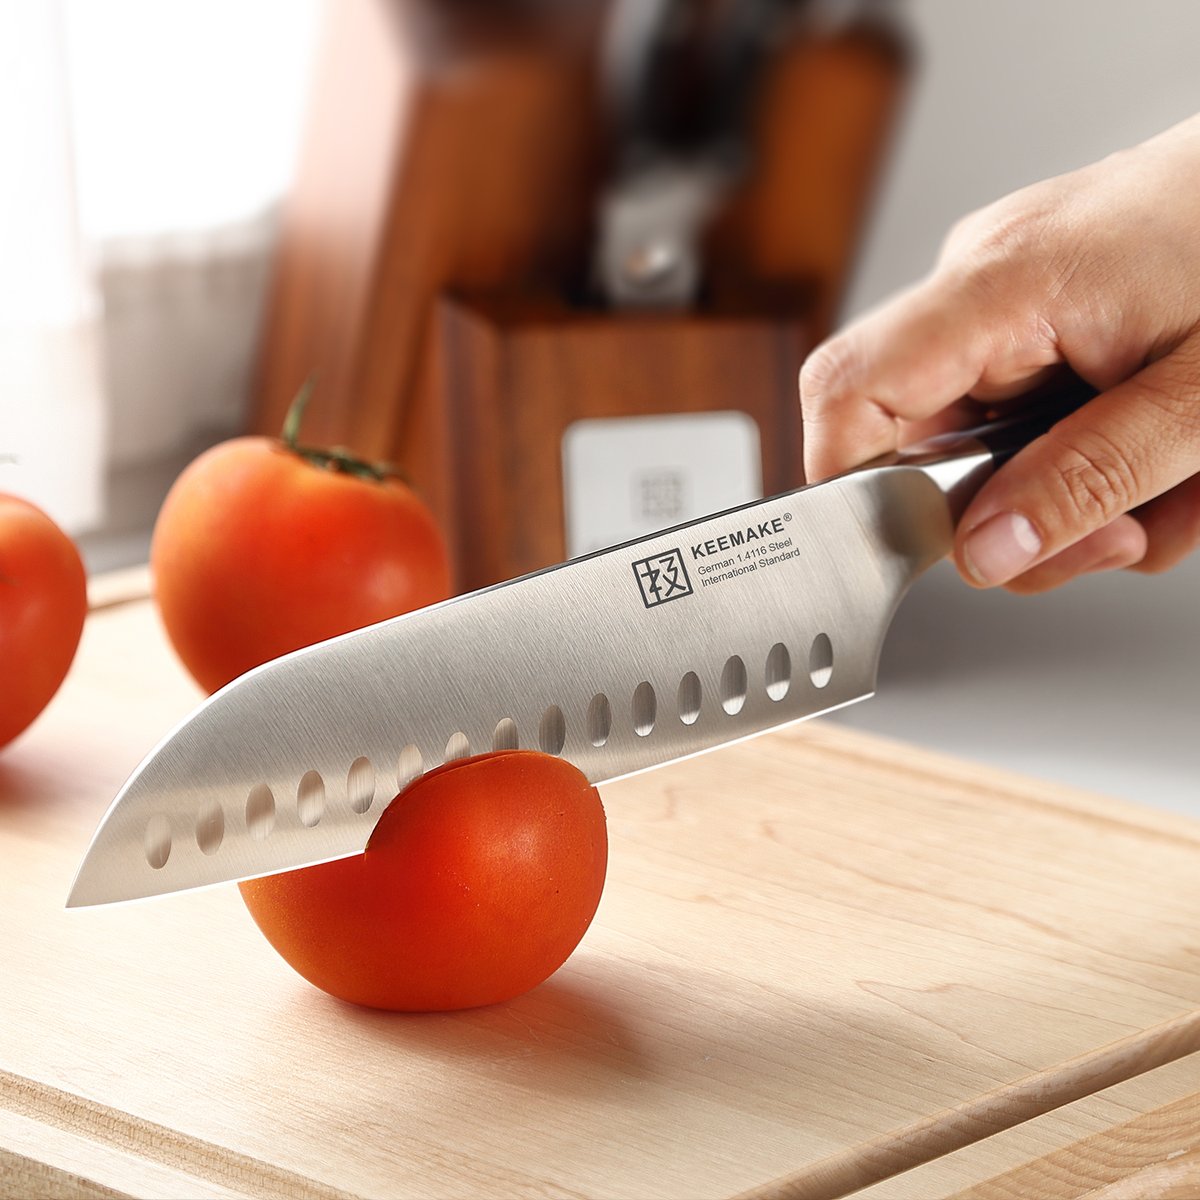 Precision and durability in one set! The KEEMAKE 8-Piece Knife Set features high-carbon German stainless steel blades and a stylish acacia wood block. Safe, convenient, and elegant! 🪵✨ #KEEMAKE #KnifeSet #KitchenStyle